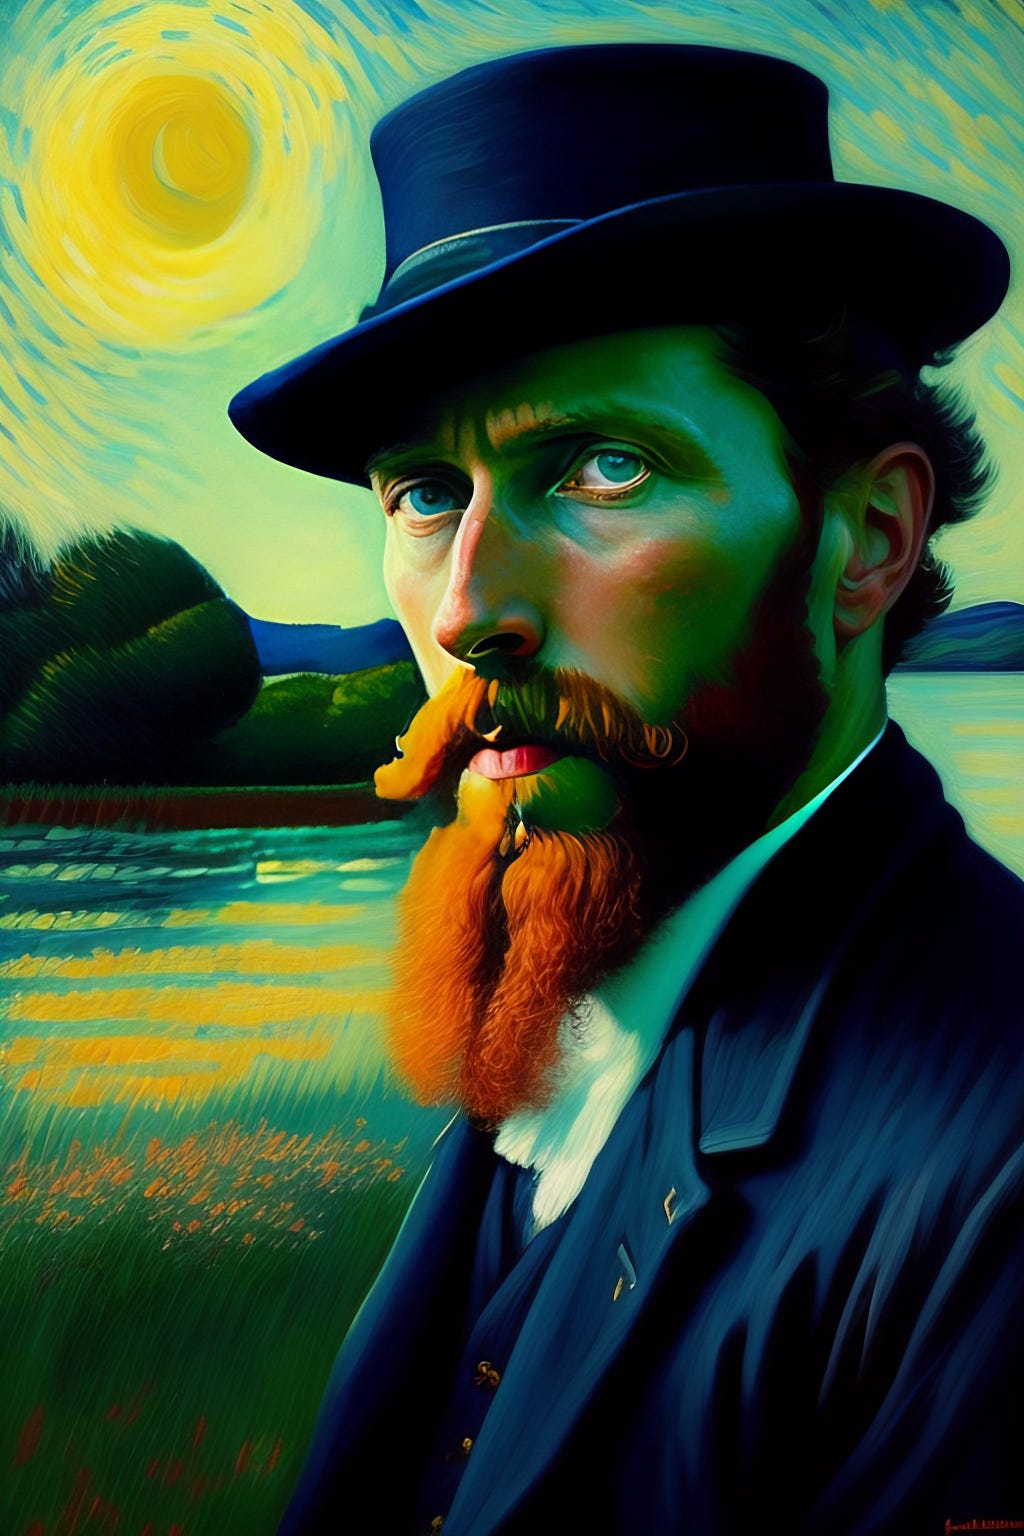 a self portrait of Van Gogh in the style of Monet